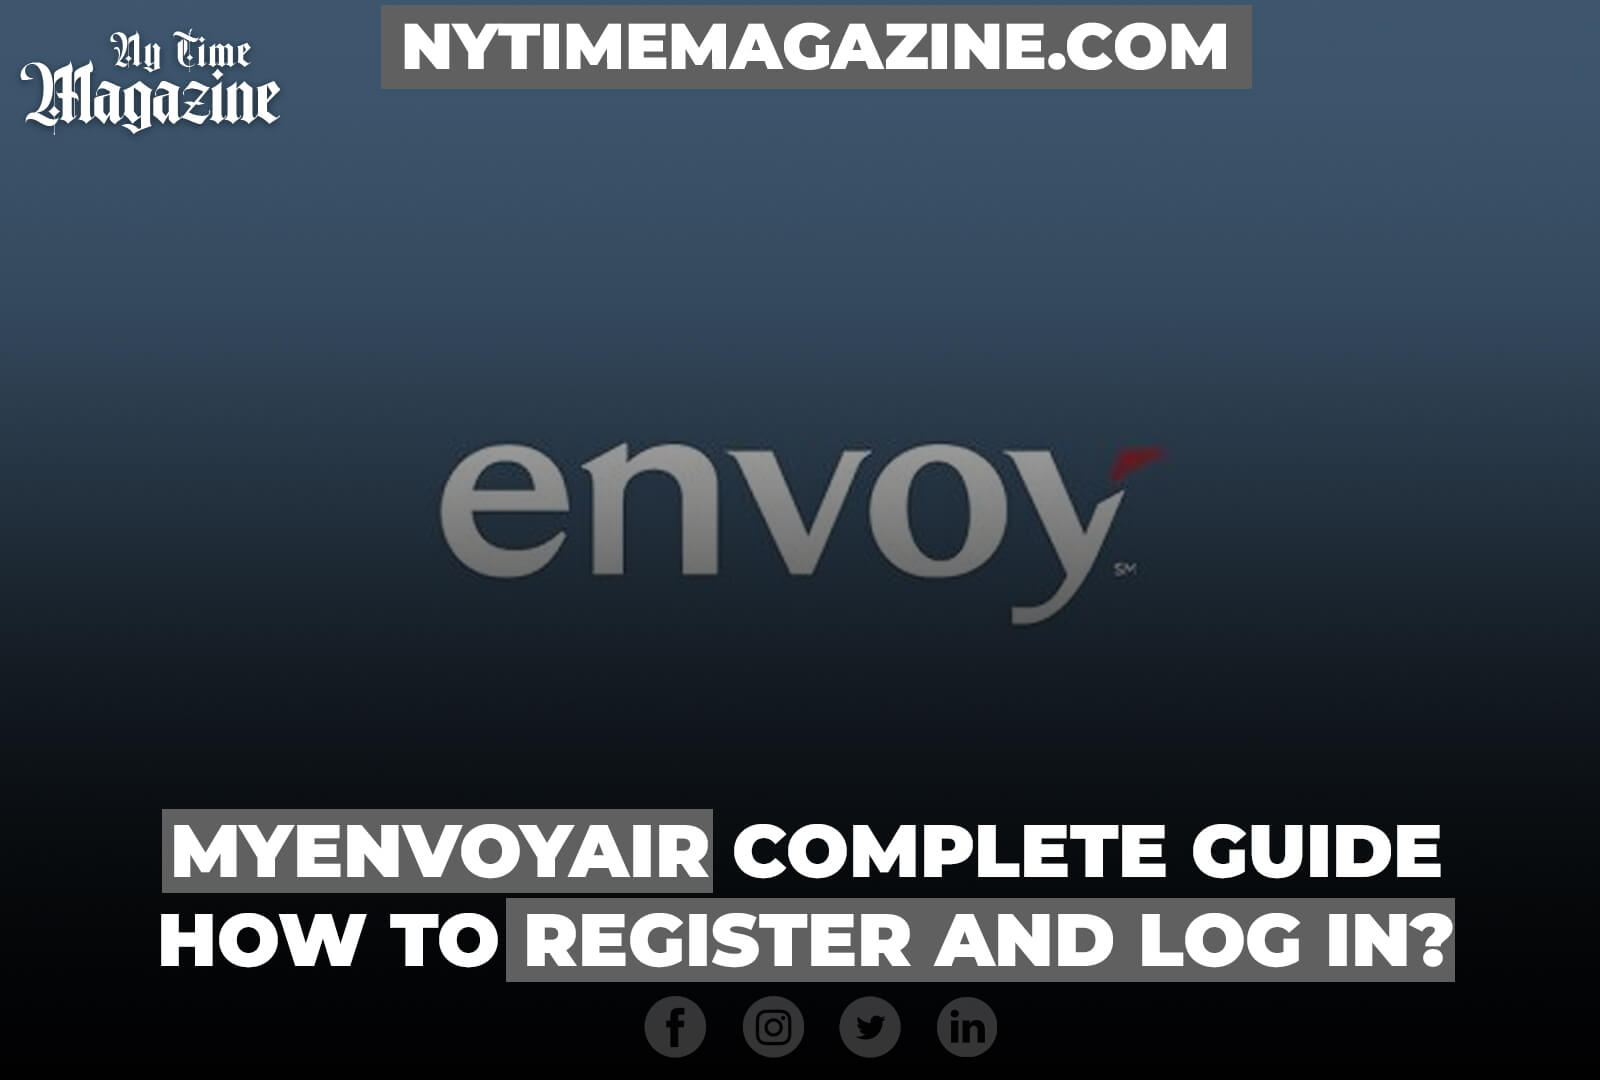 MYENVOYAIR COMPLETE GUIDE: HOW TO REGISTER AND LOG IN?